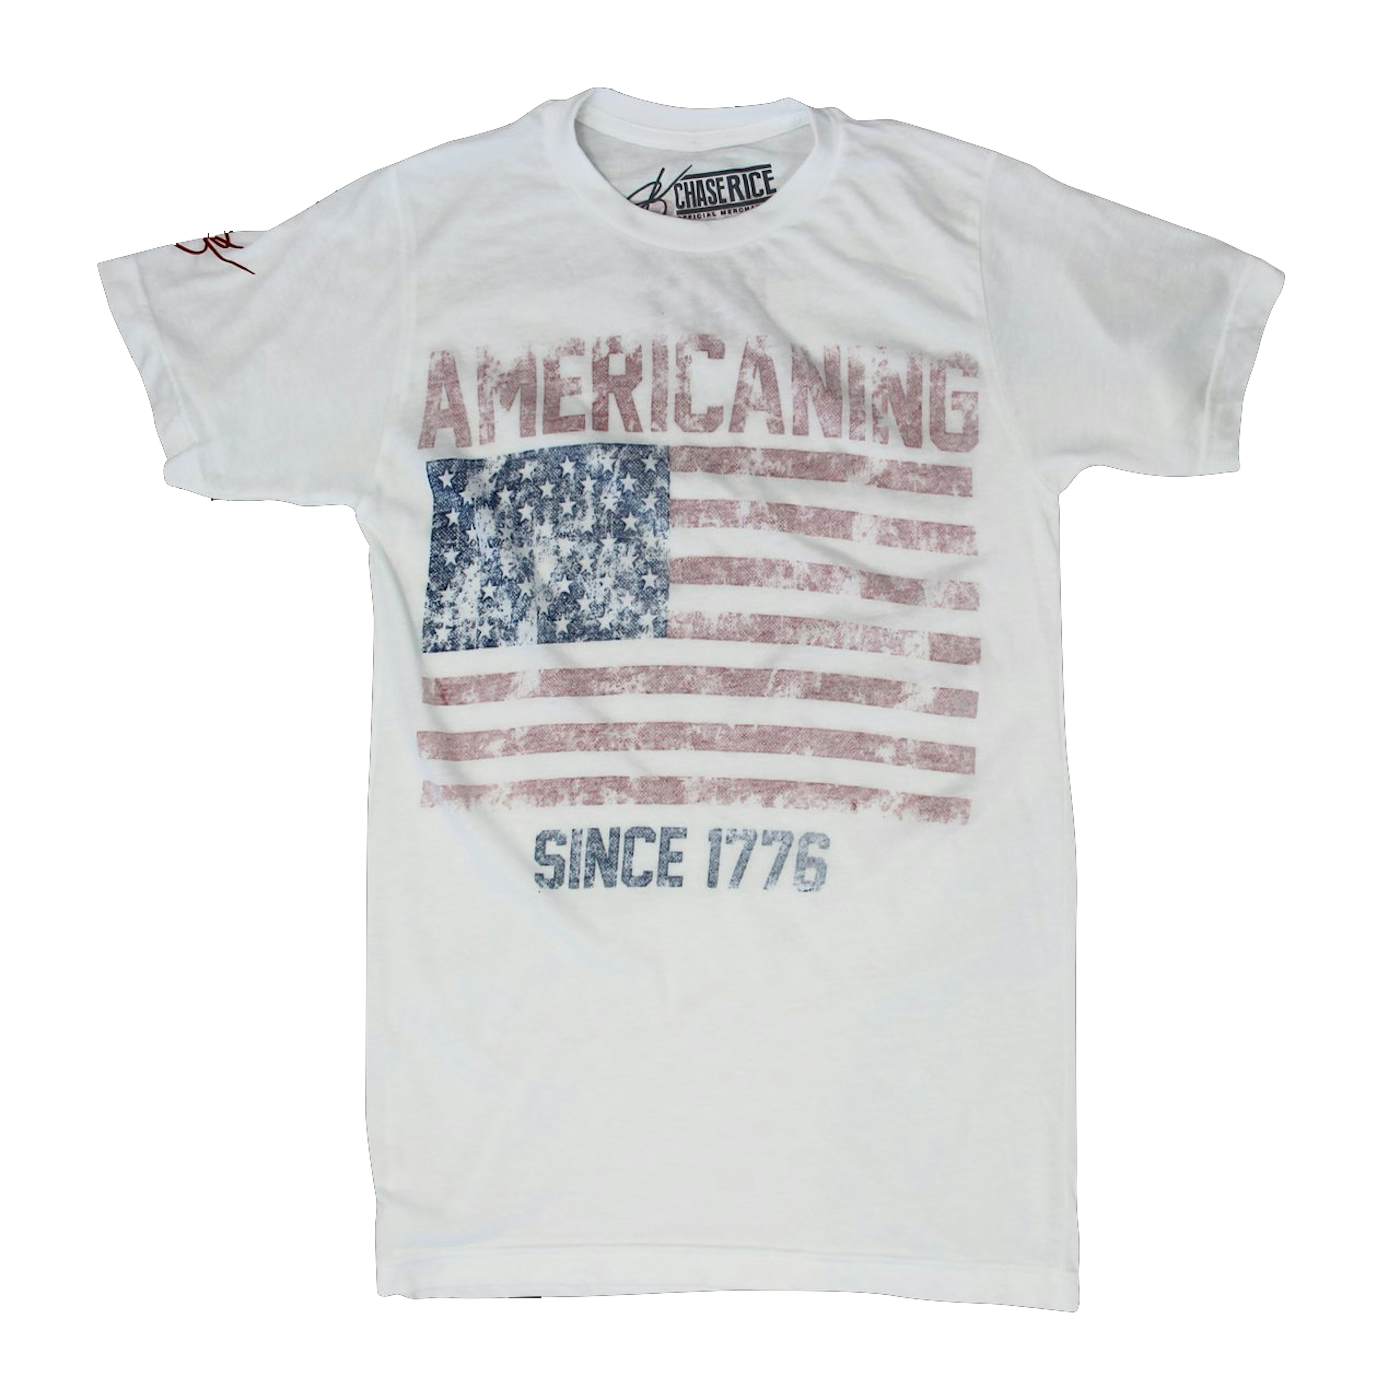 Chase Rice Americaning Tee